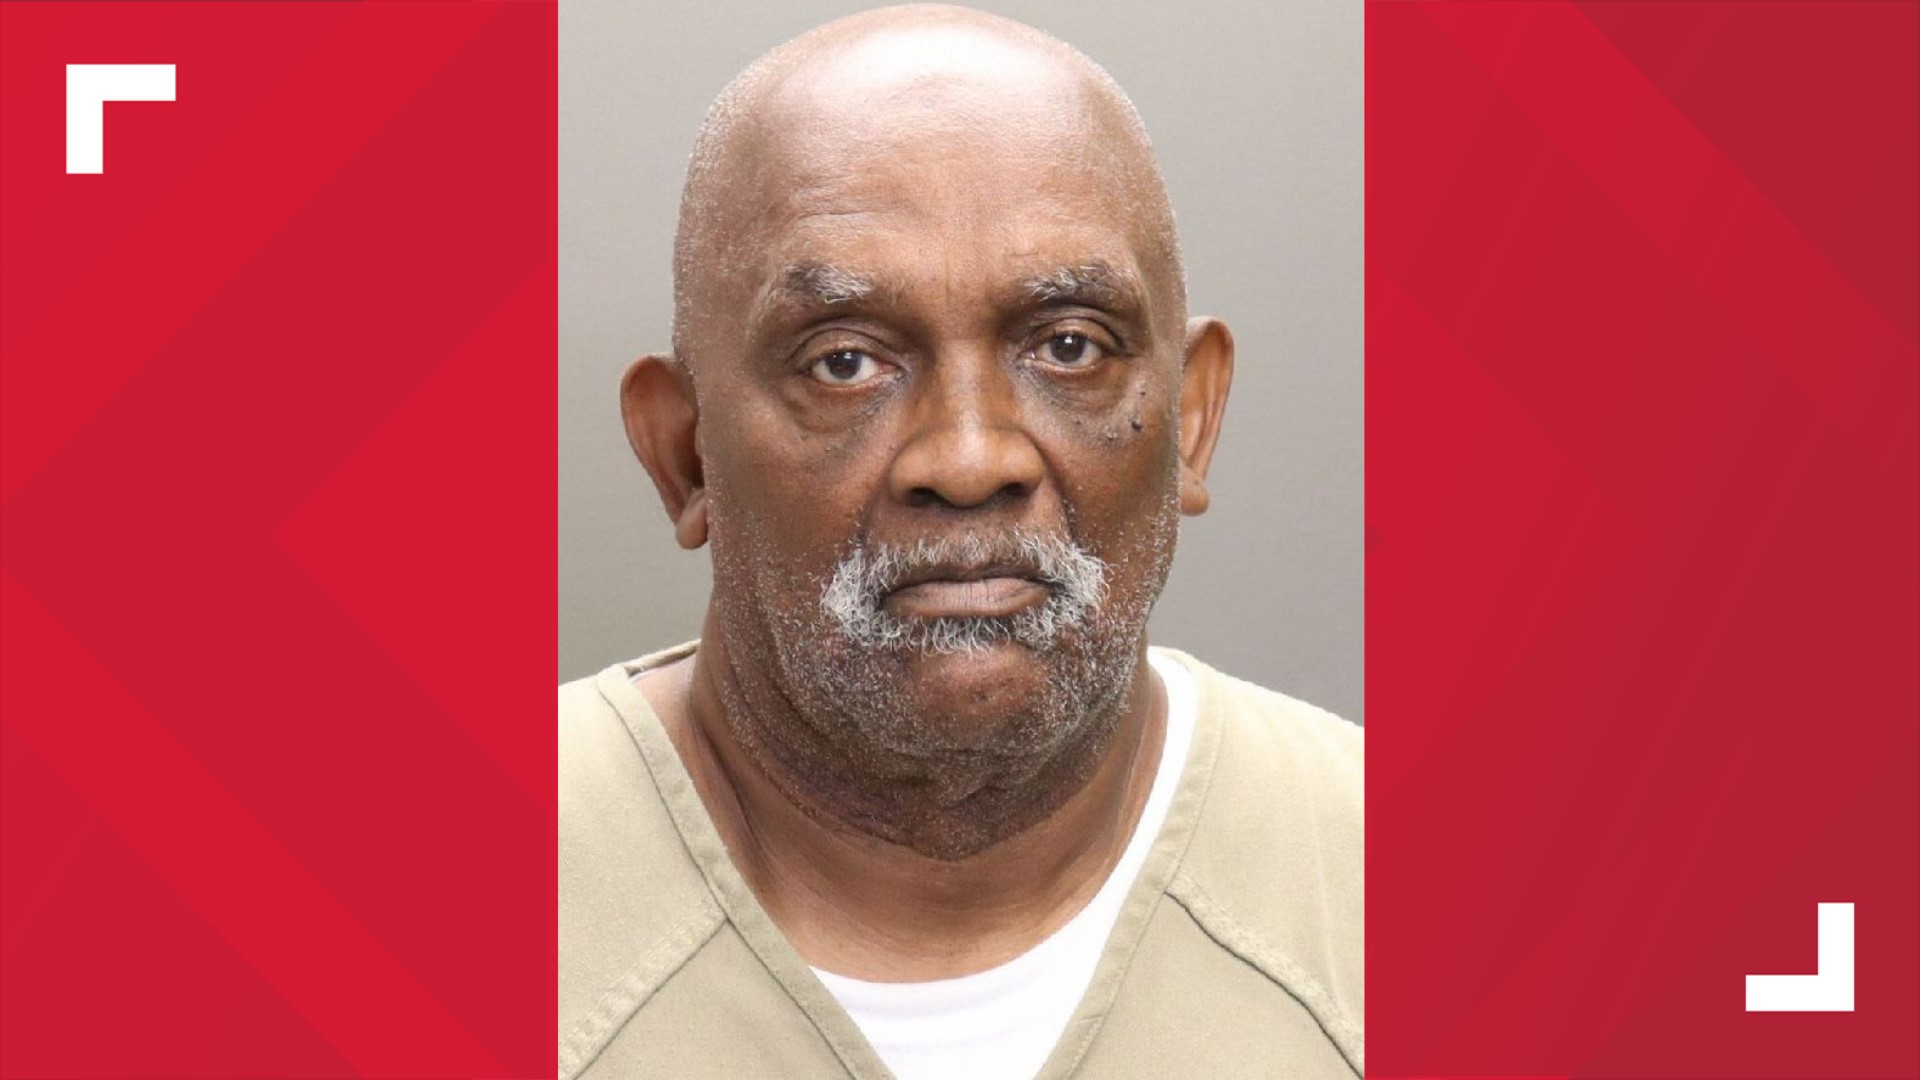 Robert Edwards is charged with aggravated murder in the death of Alma Lake on June 3, 1991.